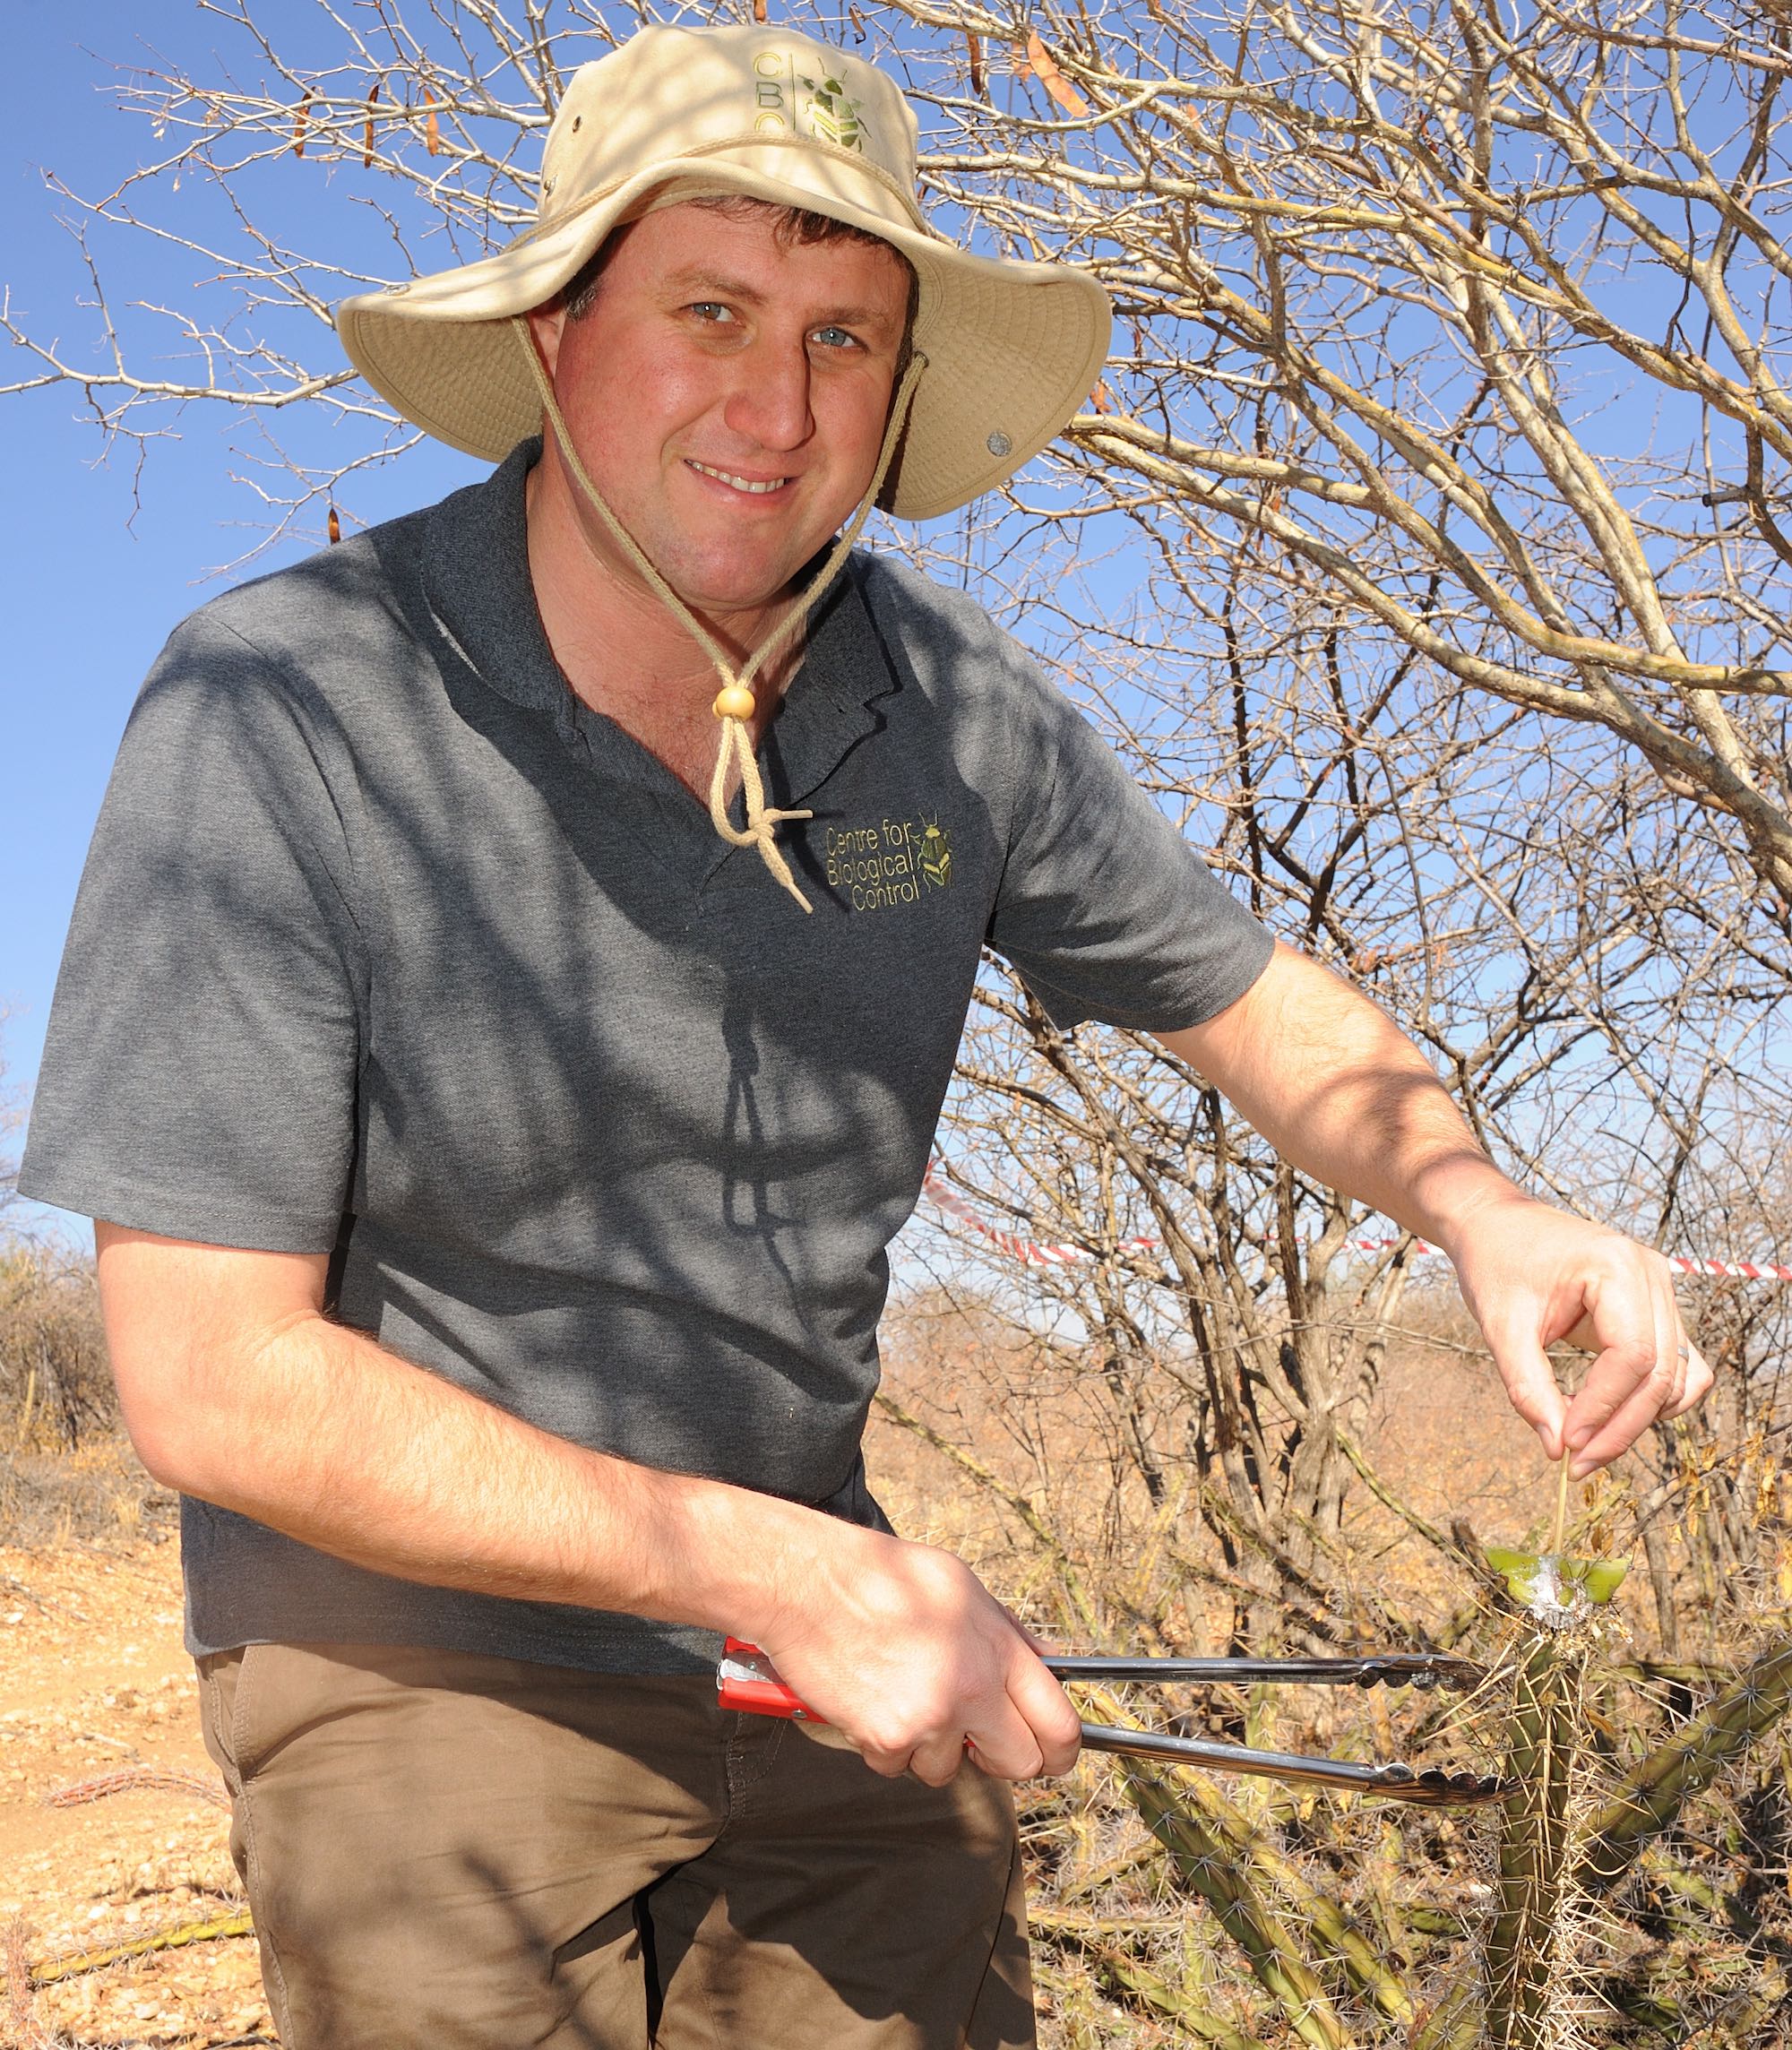 A man in a hat holding a cactus stem and a pair of braai tongs smiles at the camera.